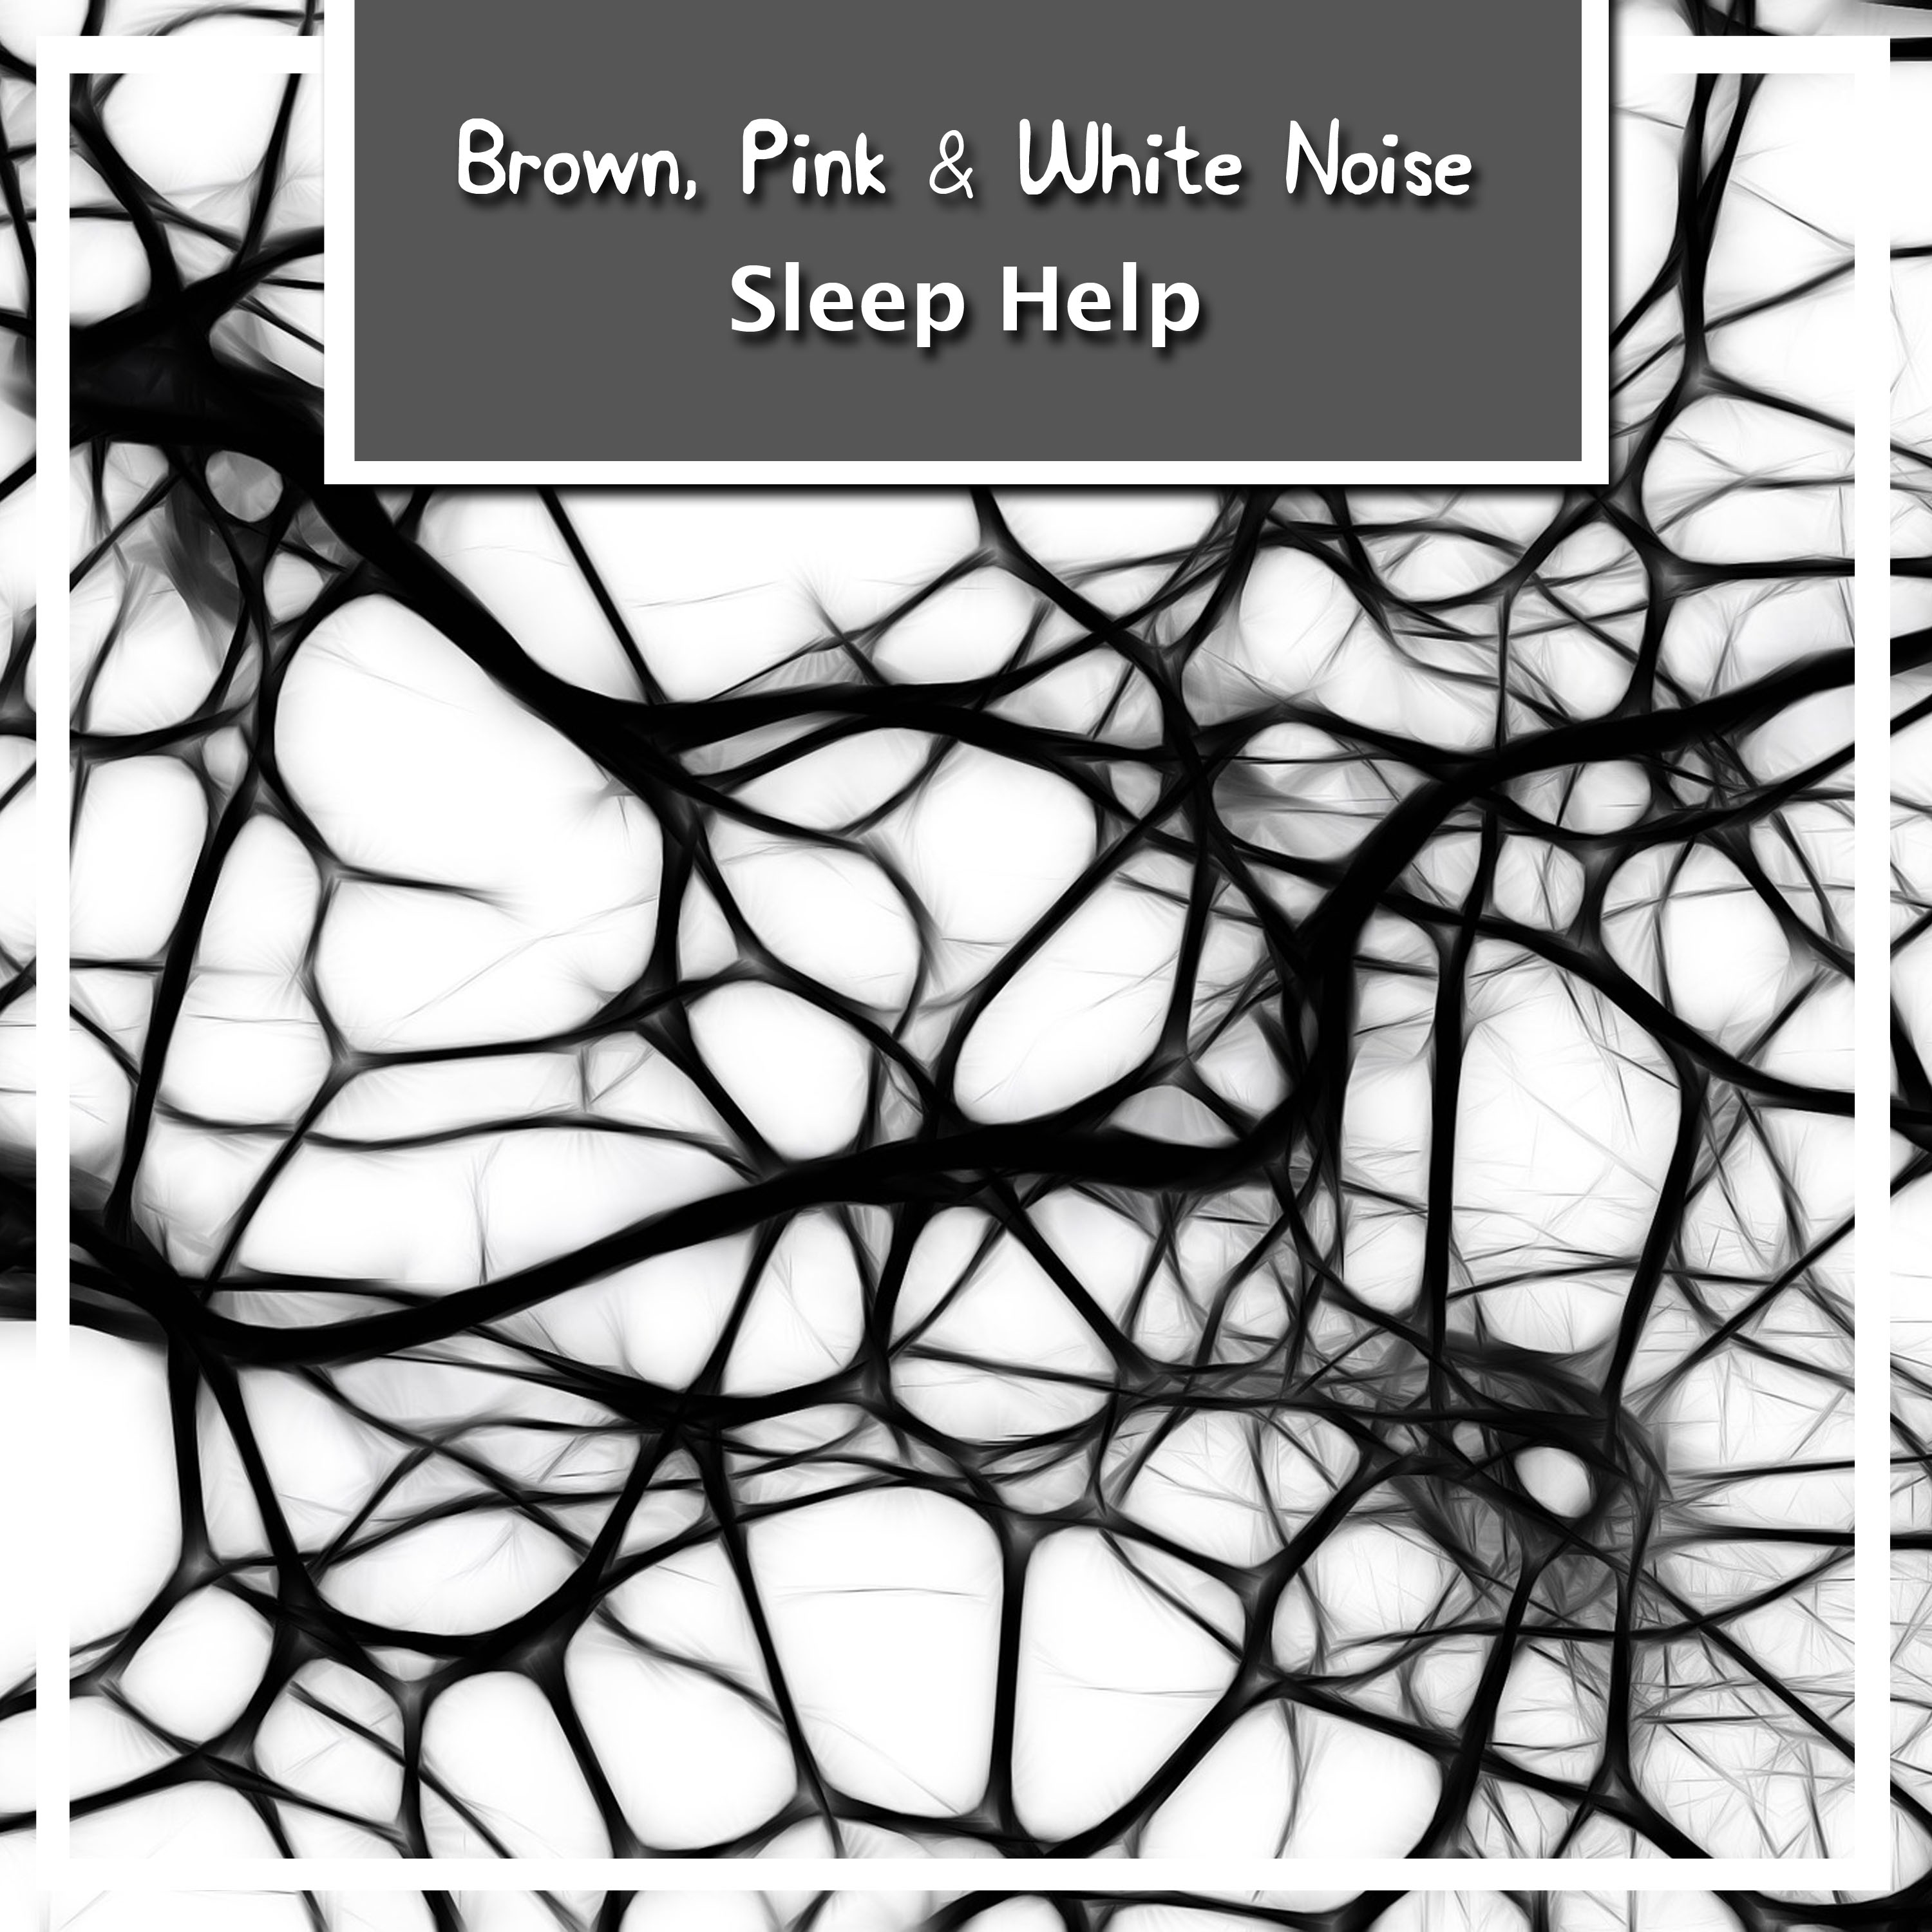 15 Brown, Pink & White Noises for Sleep Help